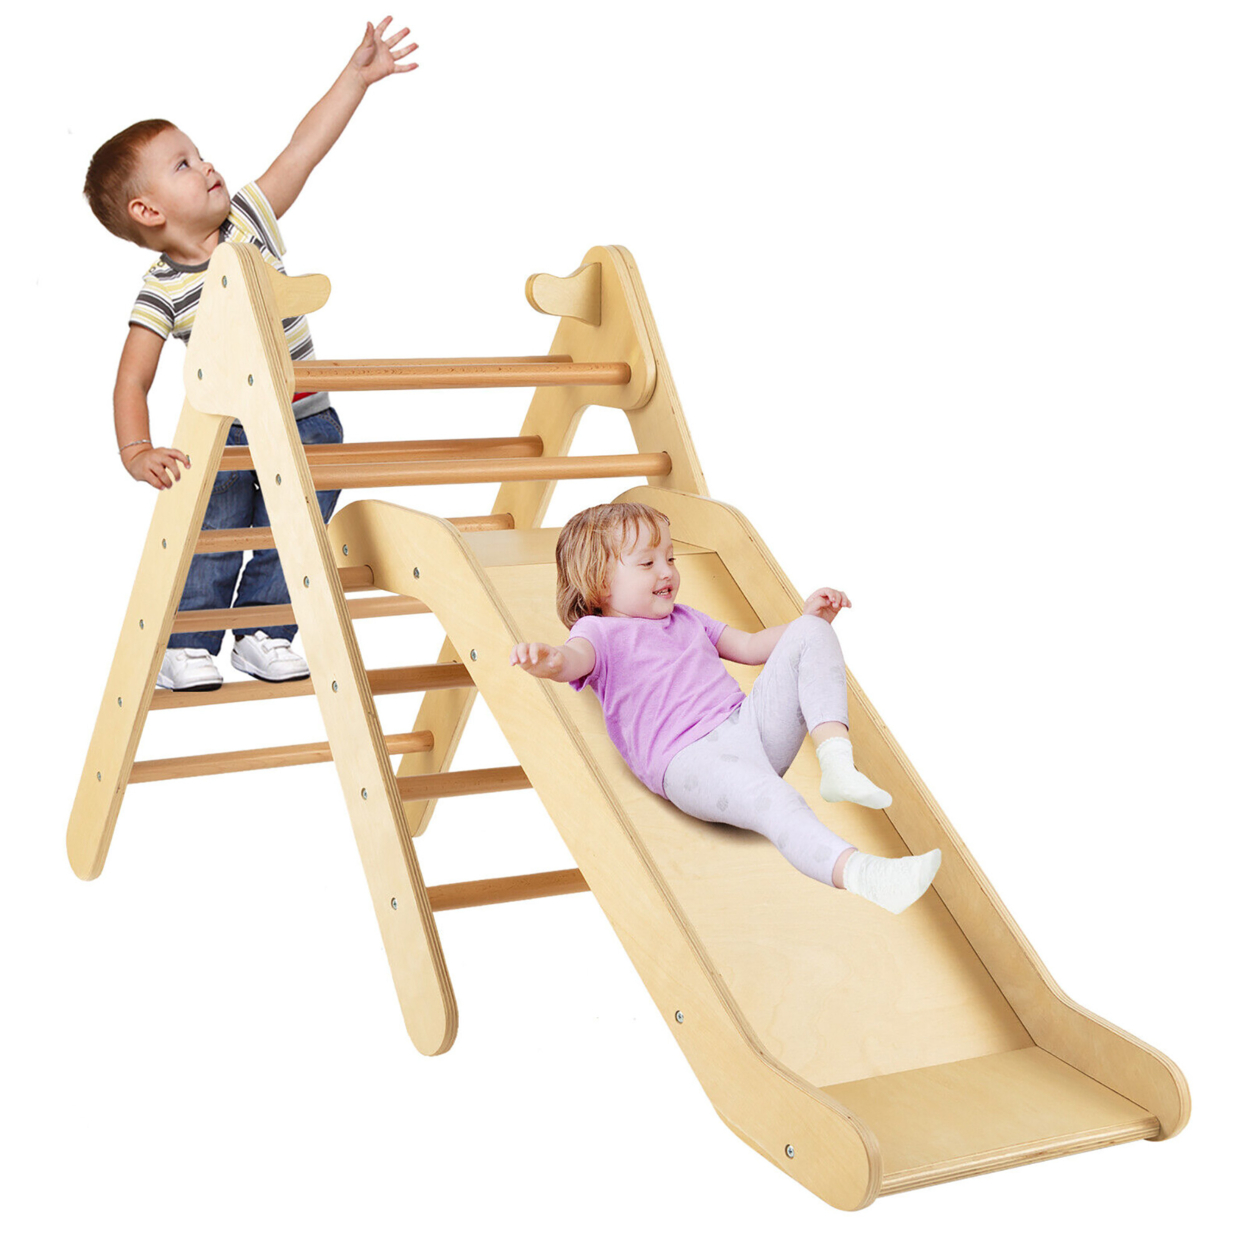 2-in-1 Wooden Climbing Triangle Set Triangle Climber W/ Ramp - Natural